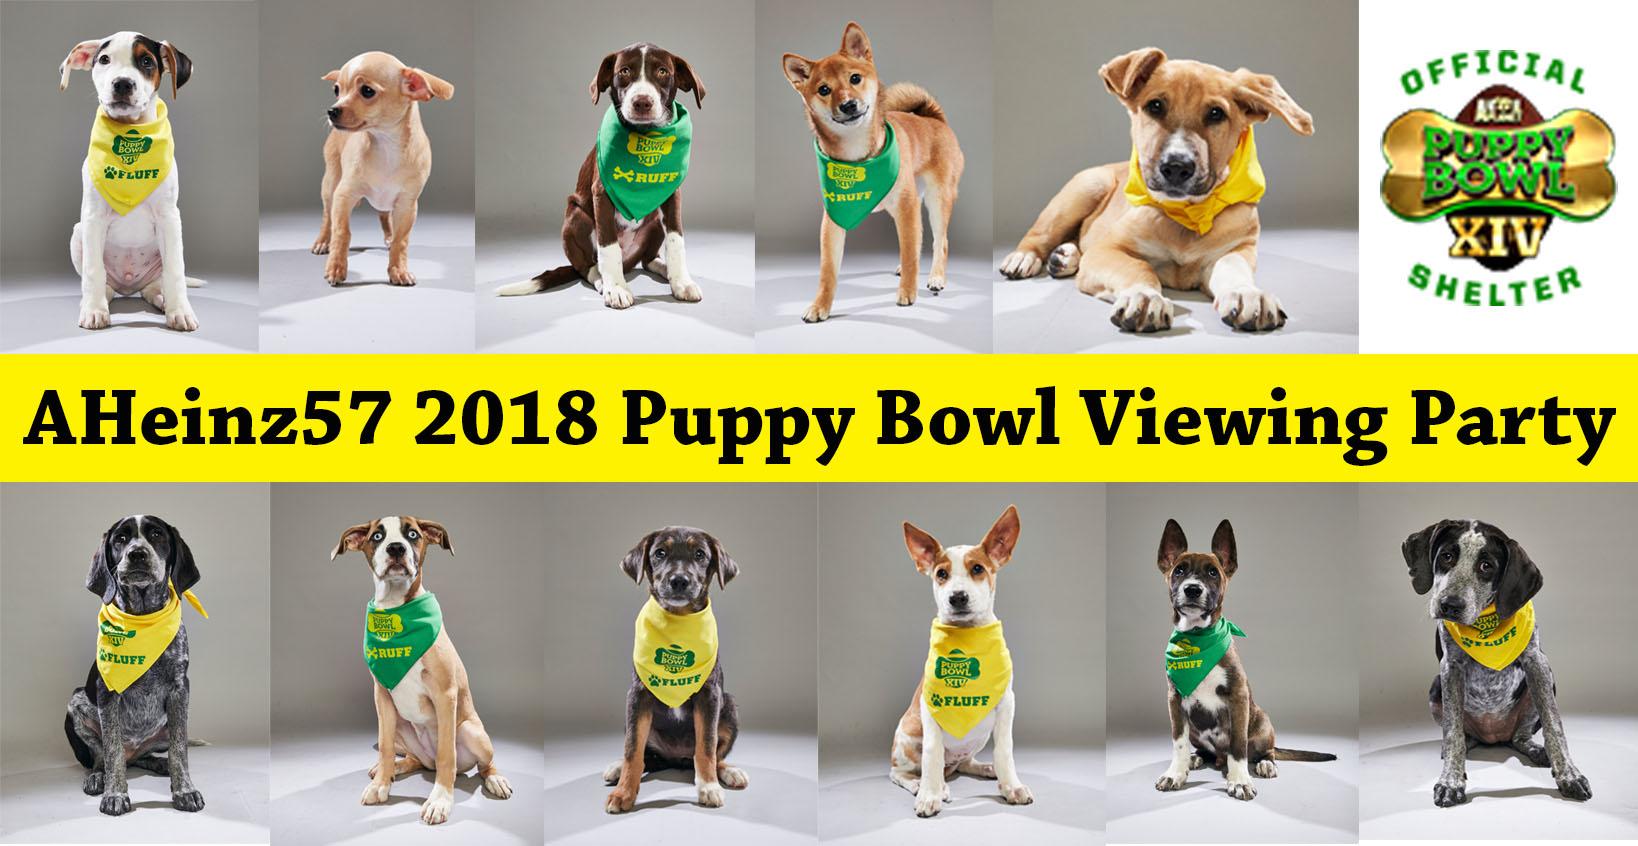 AHeinz57 Puppy Bowl Viewing Party 2018